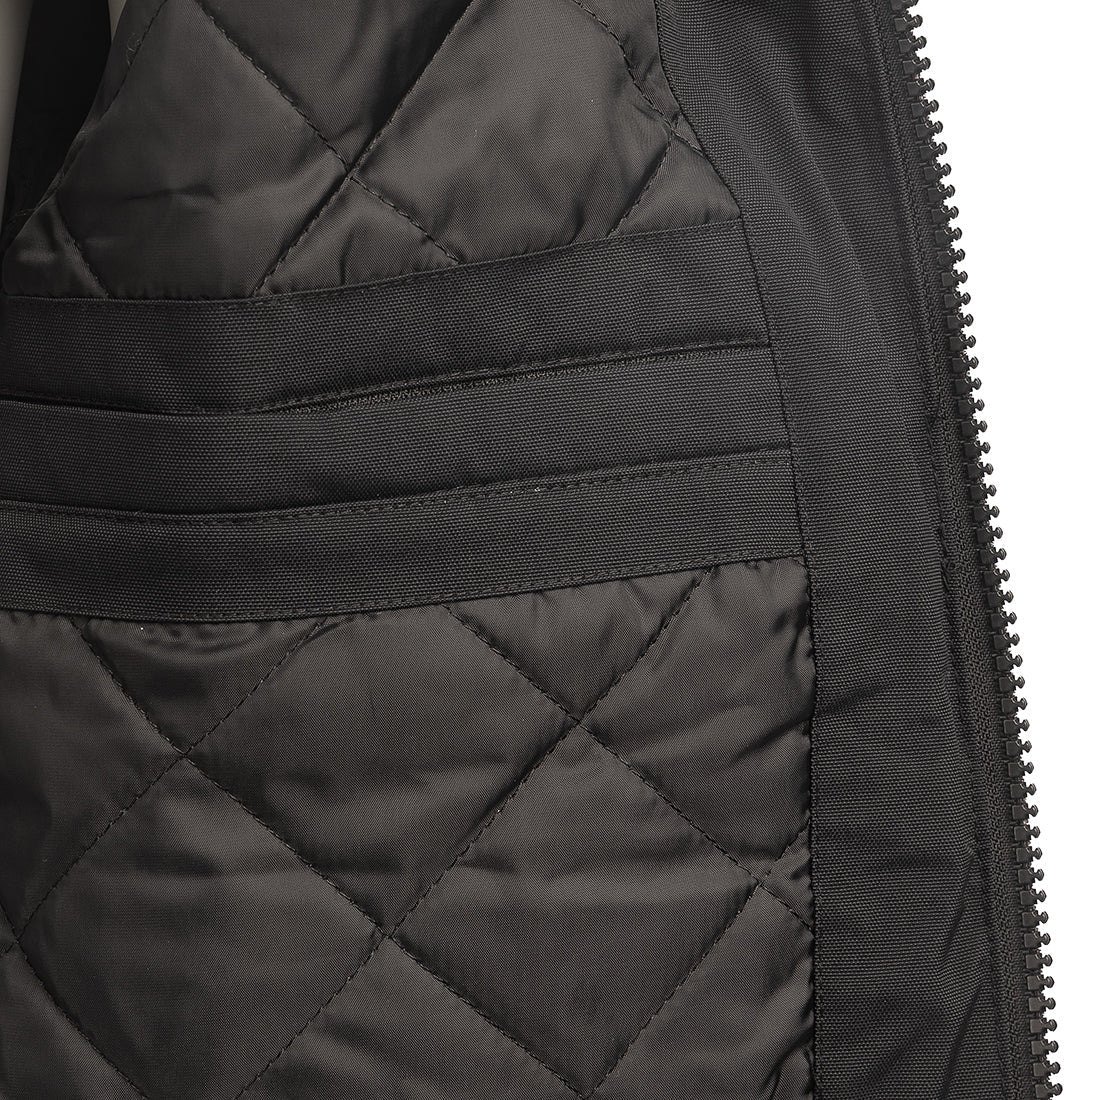 Stay Warm and Stylish with Original Winter Jacket (Anthracite) - Arrak  Outdoor USA